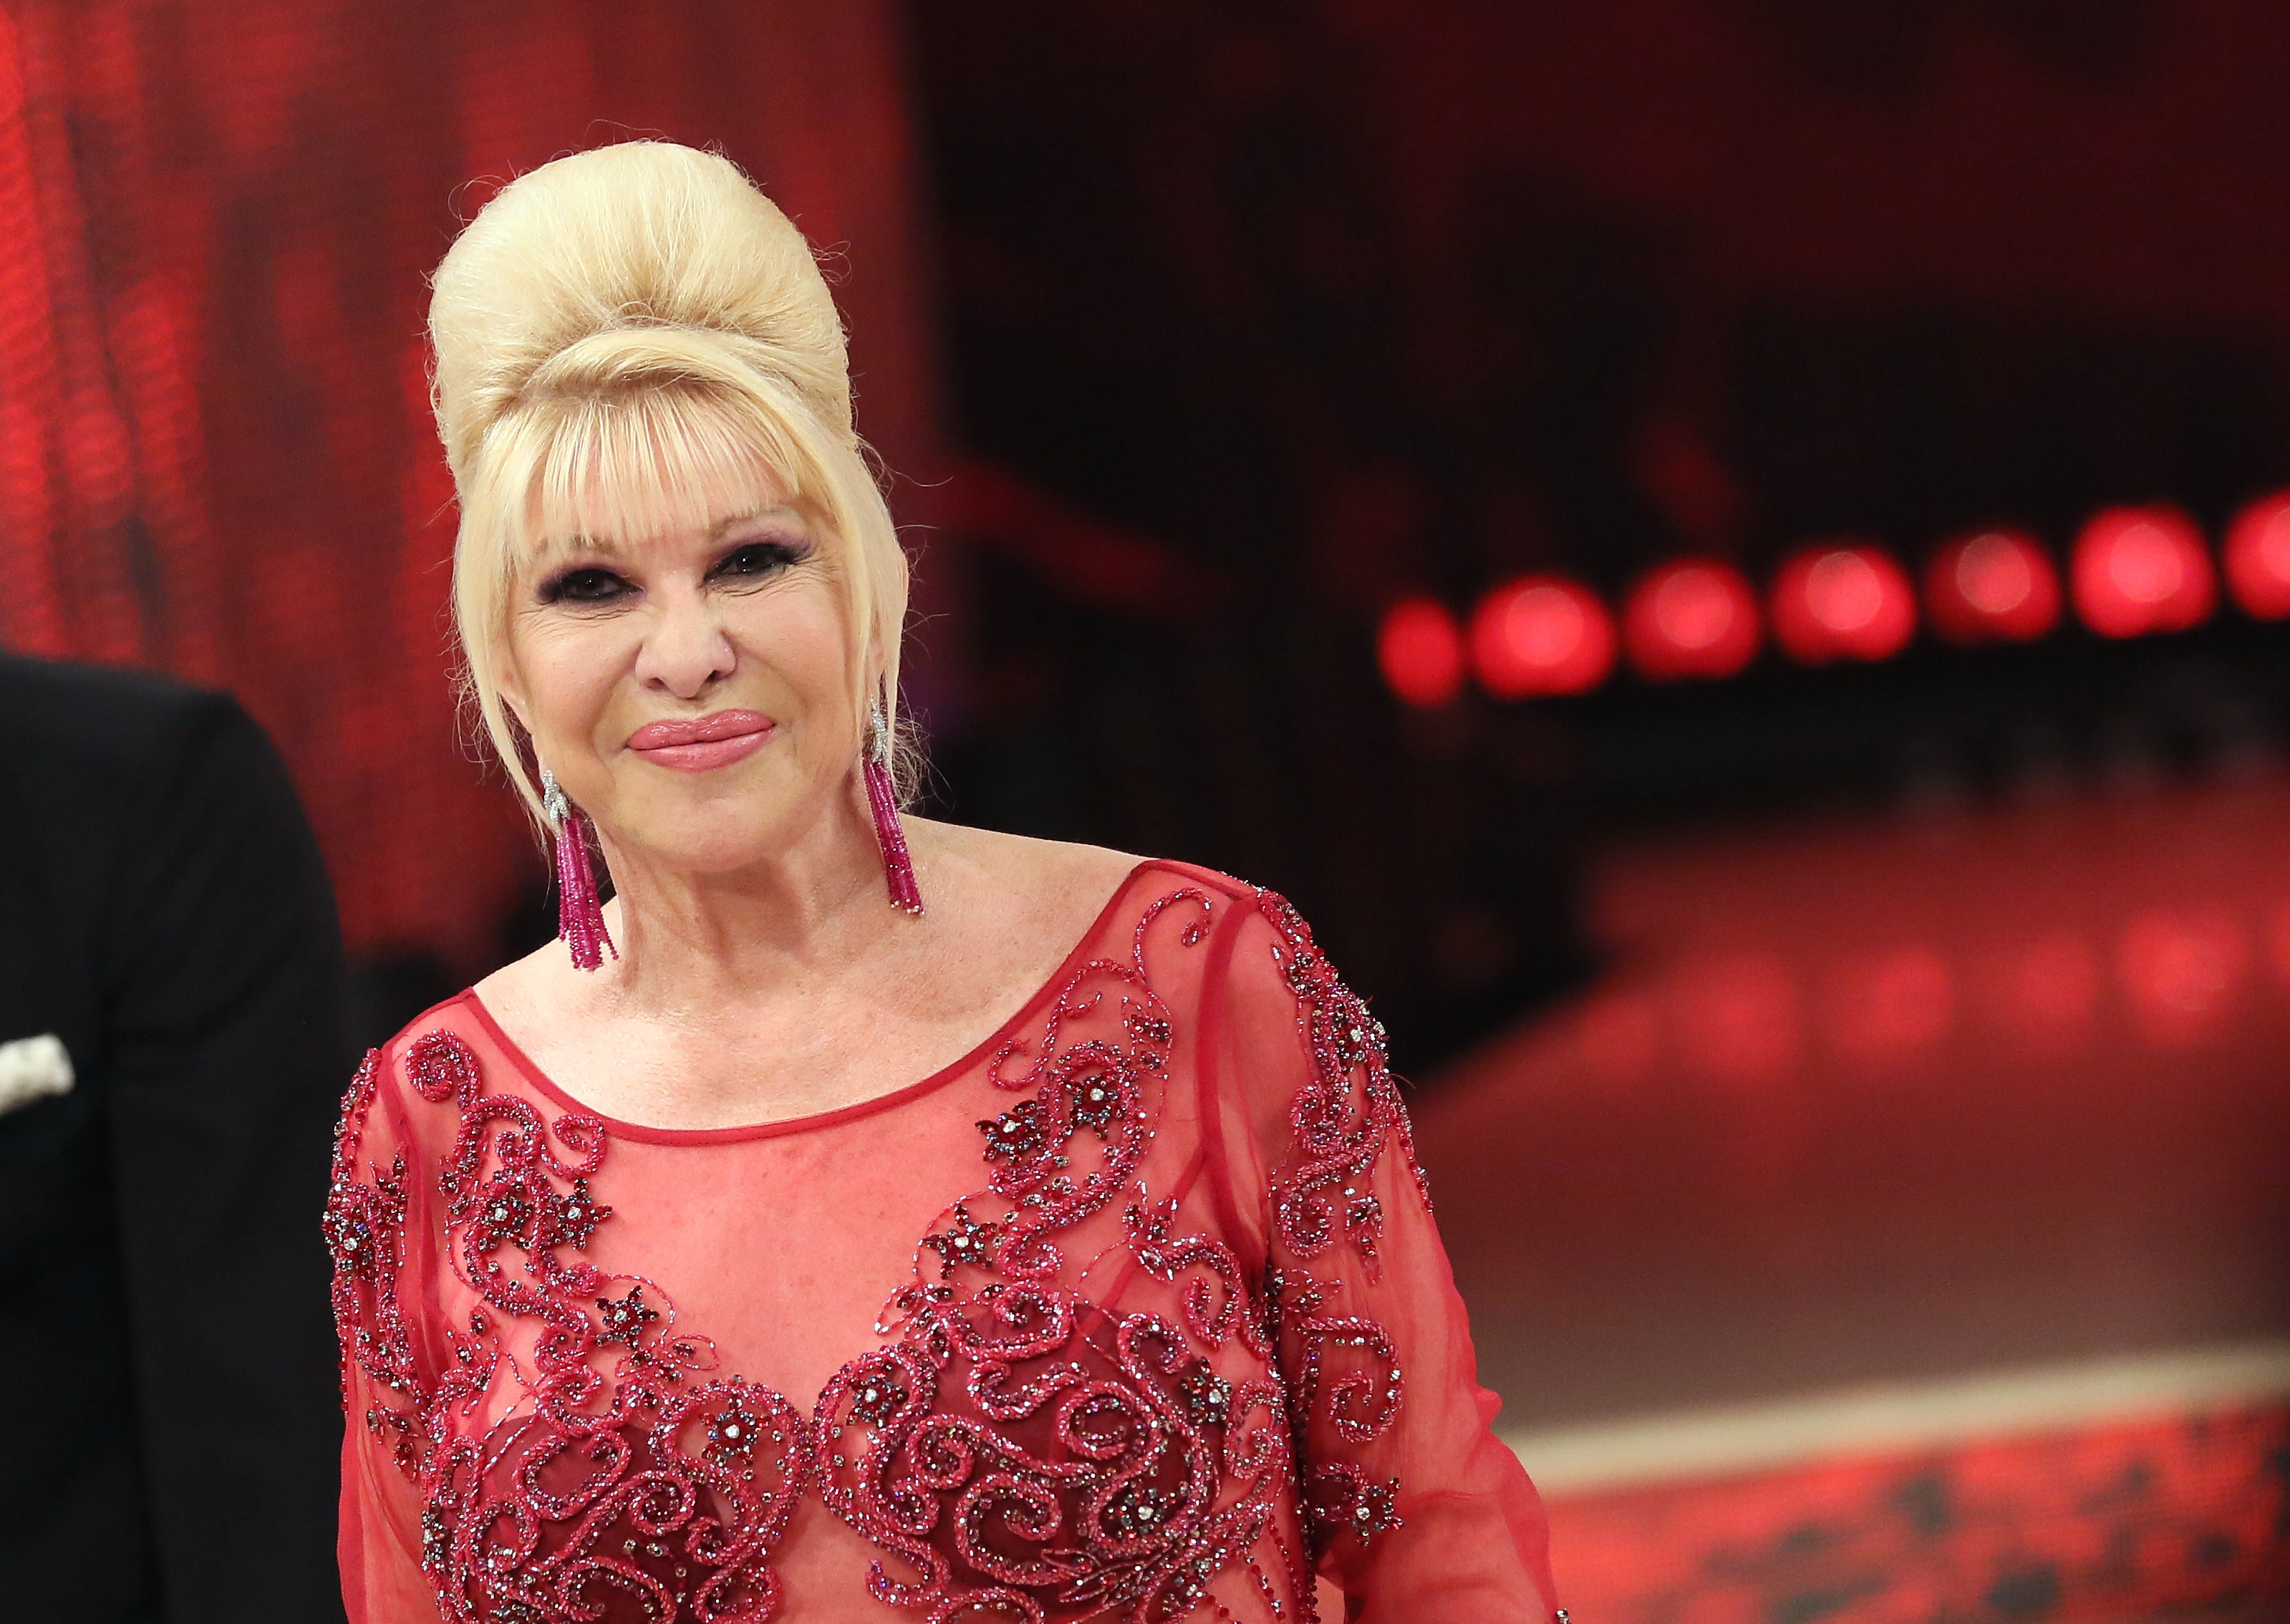 Ivana Trump, first wife of Donald Trump, appears on the Italian TV show, Ballando Con Le Stelle (Dancing With the Stars)